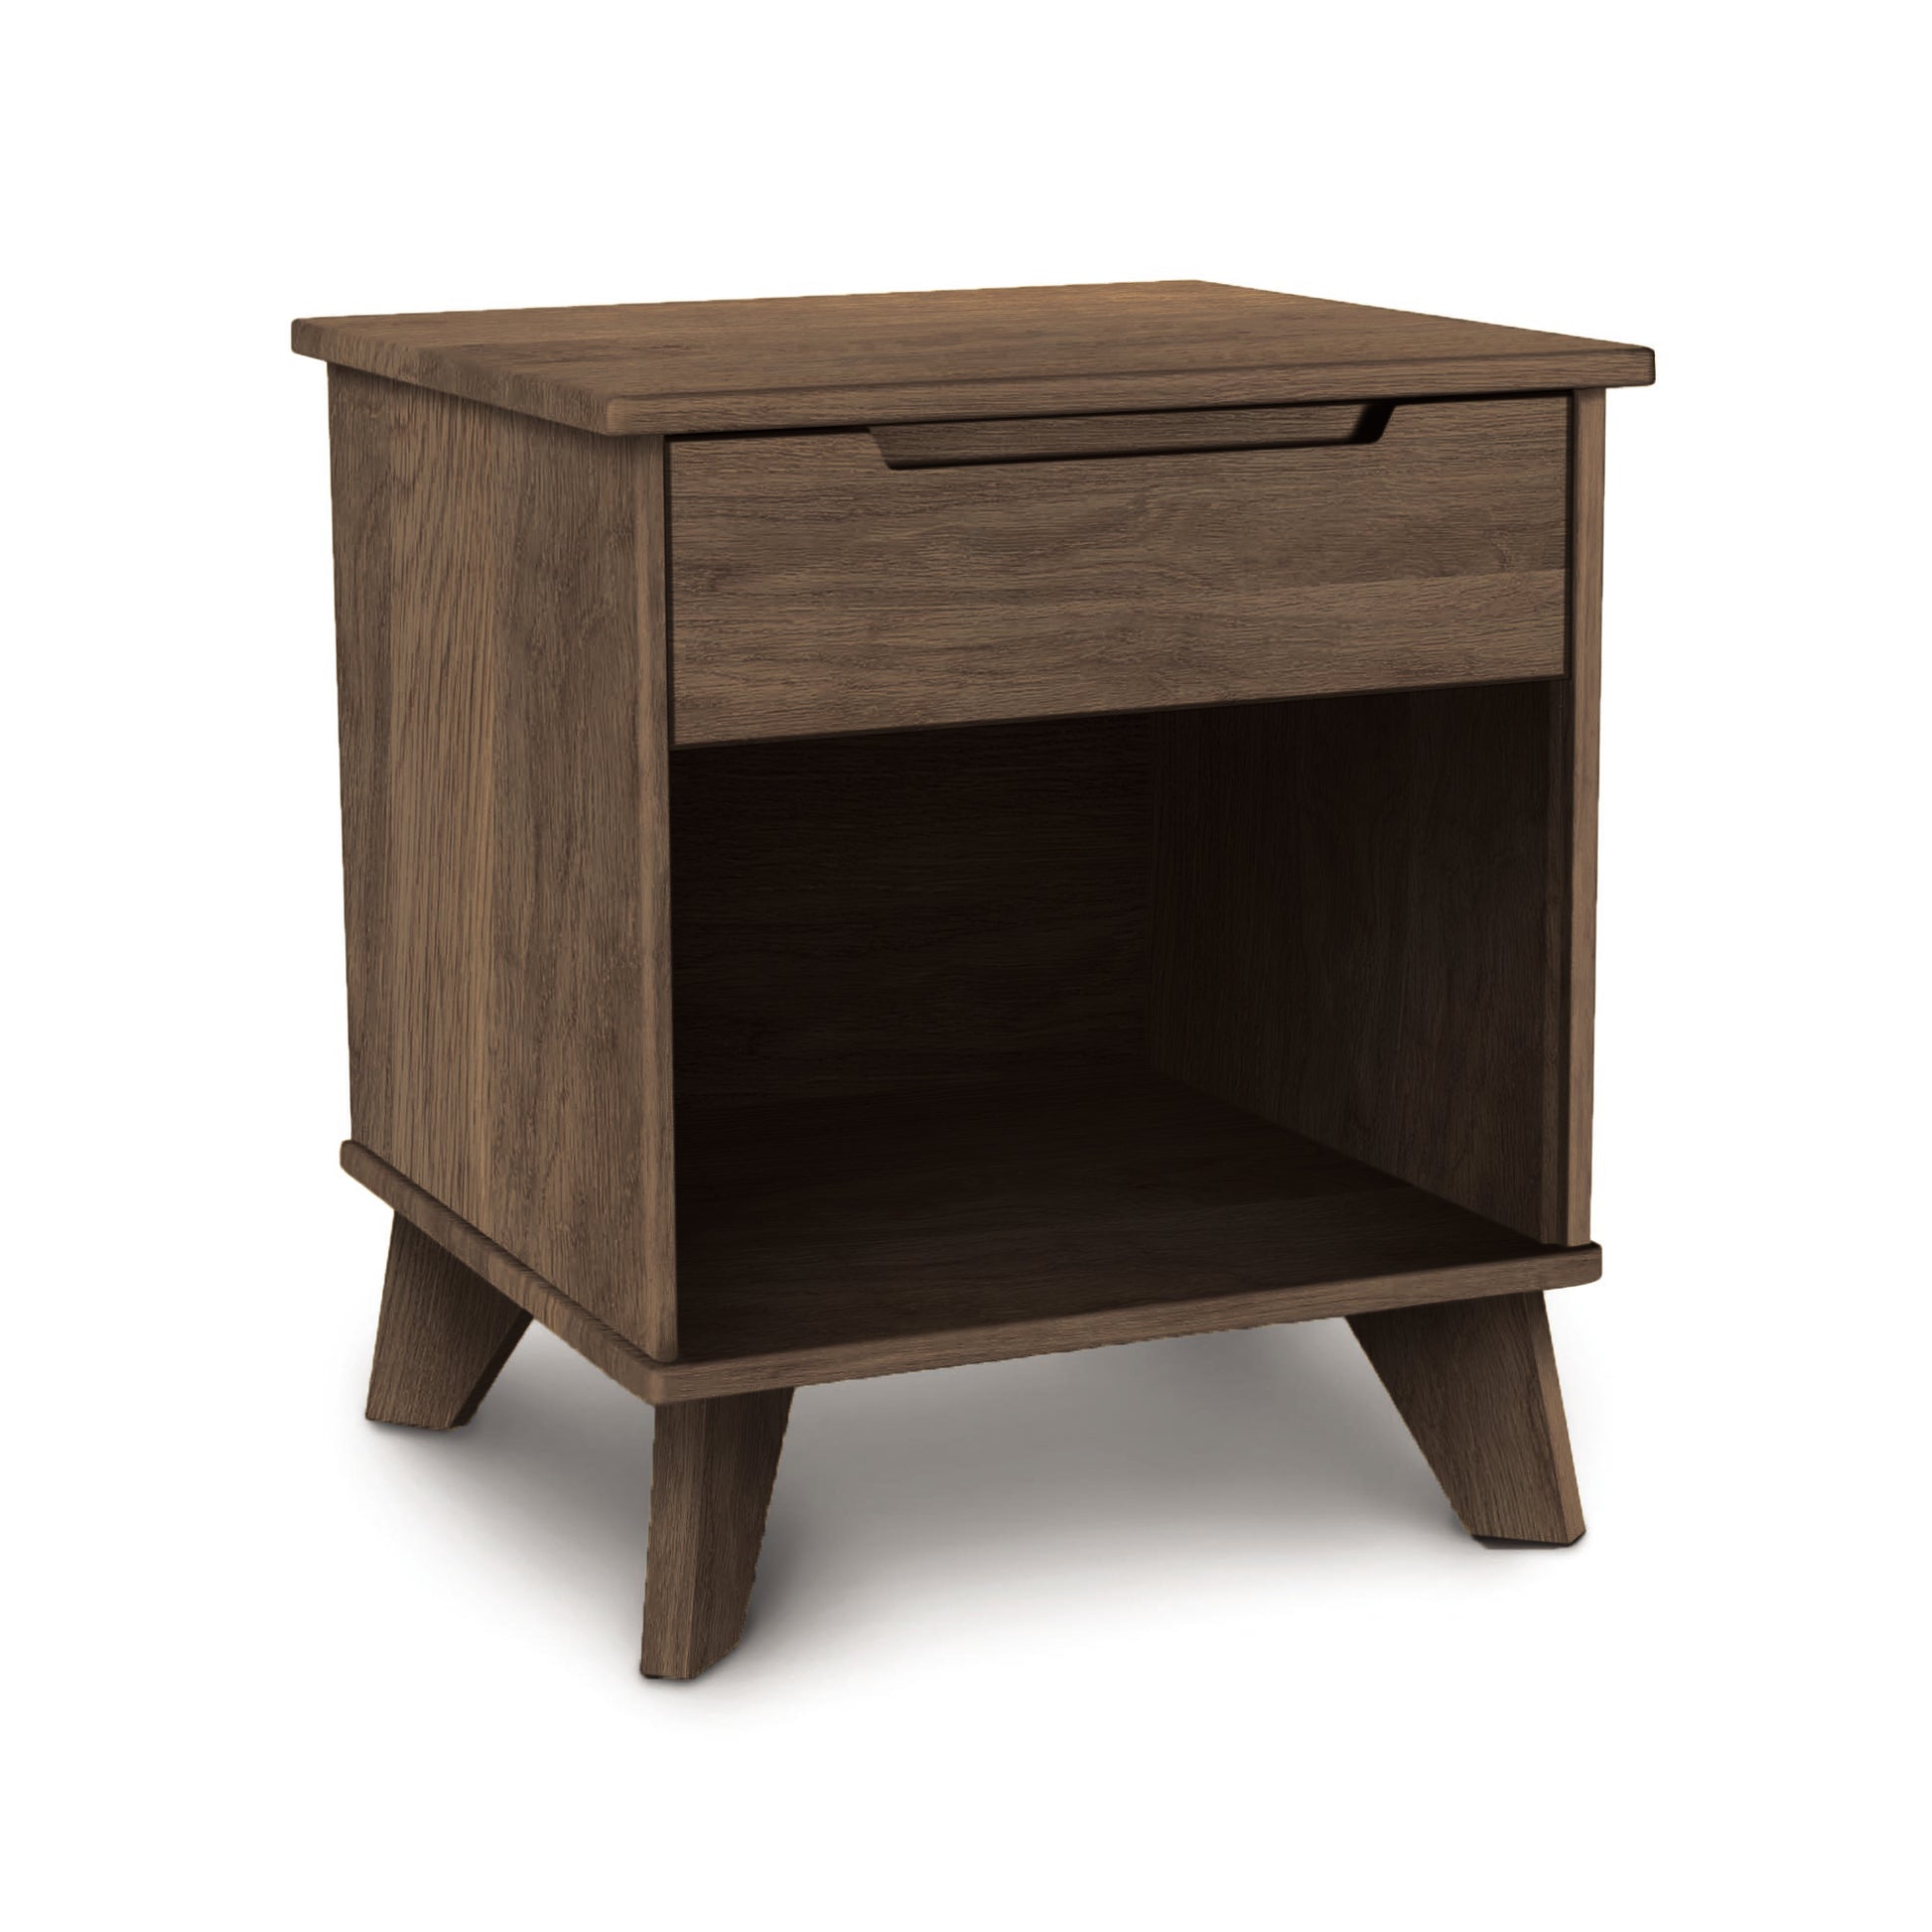 A sustainable Linn 1-Drawer Enclosed Shelf nightstand by Copeland Furniture.